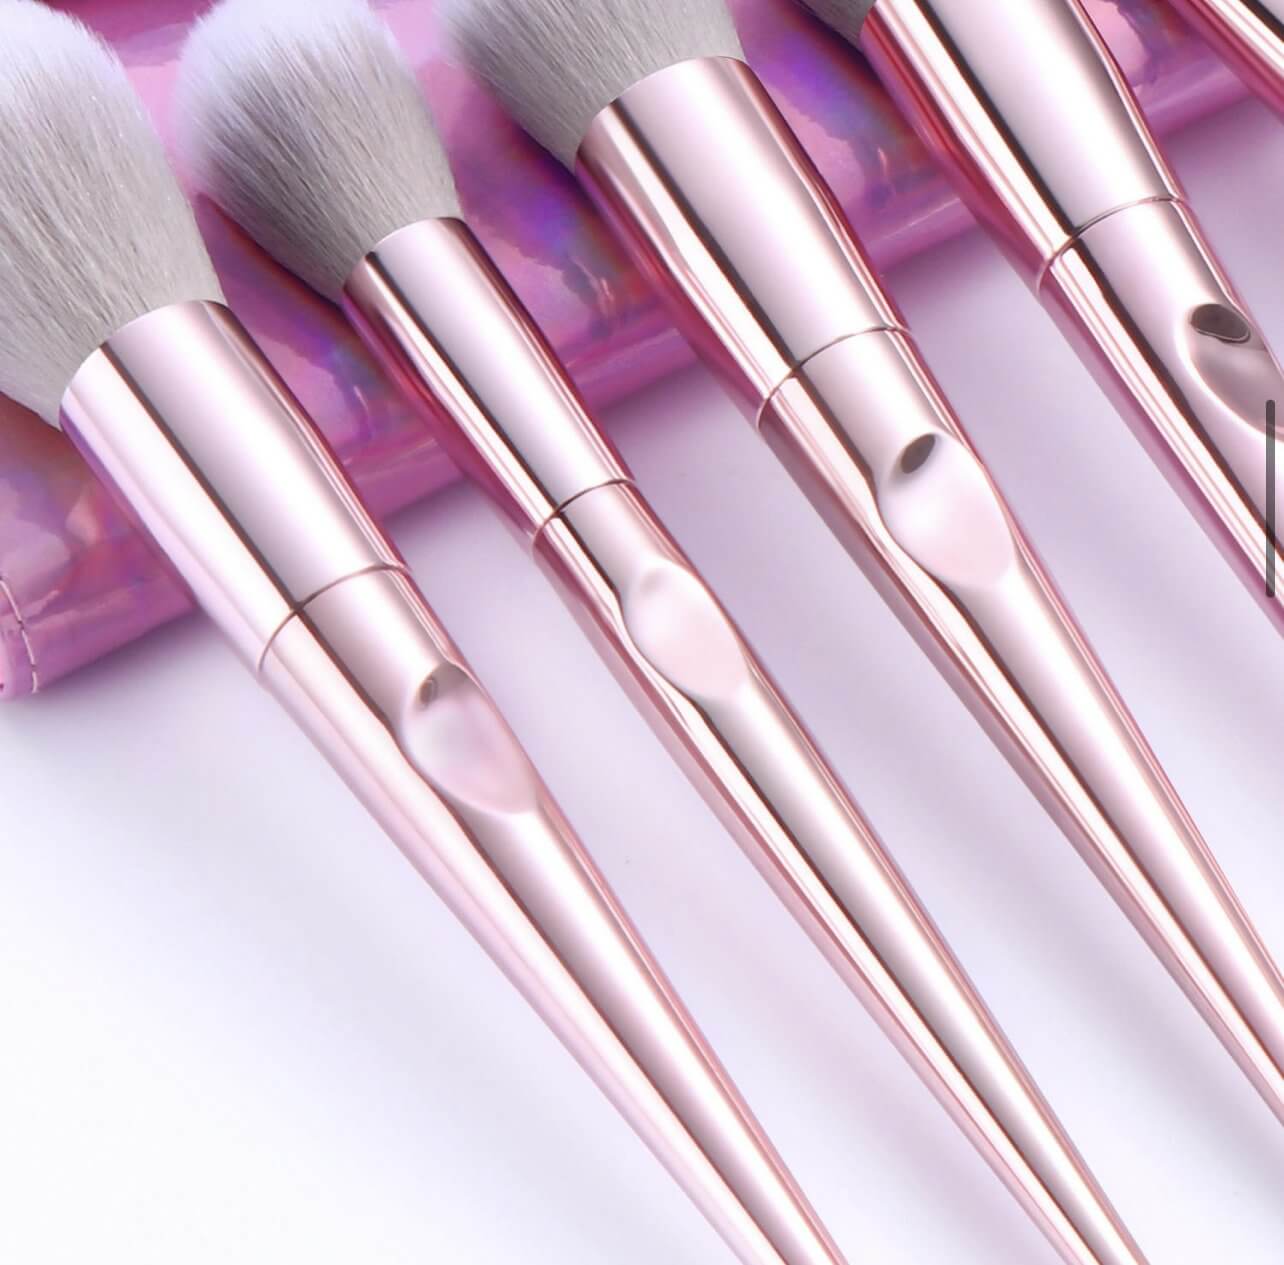 Texture shot of pink chrome handles on Makeup Brushes